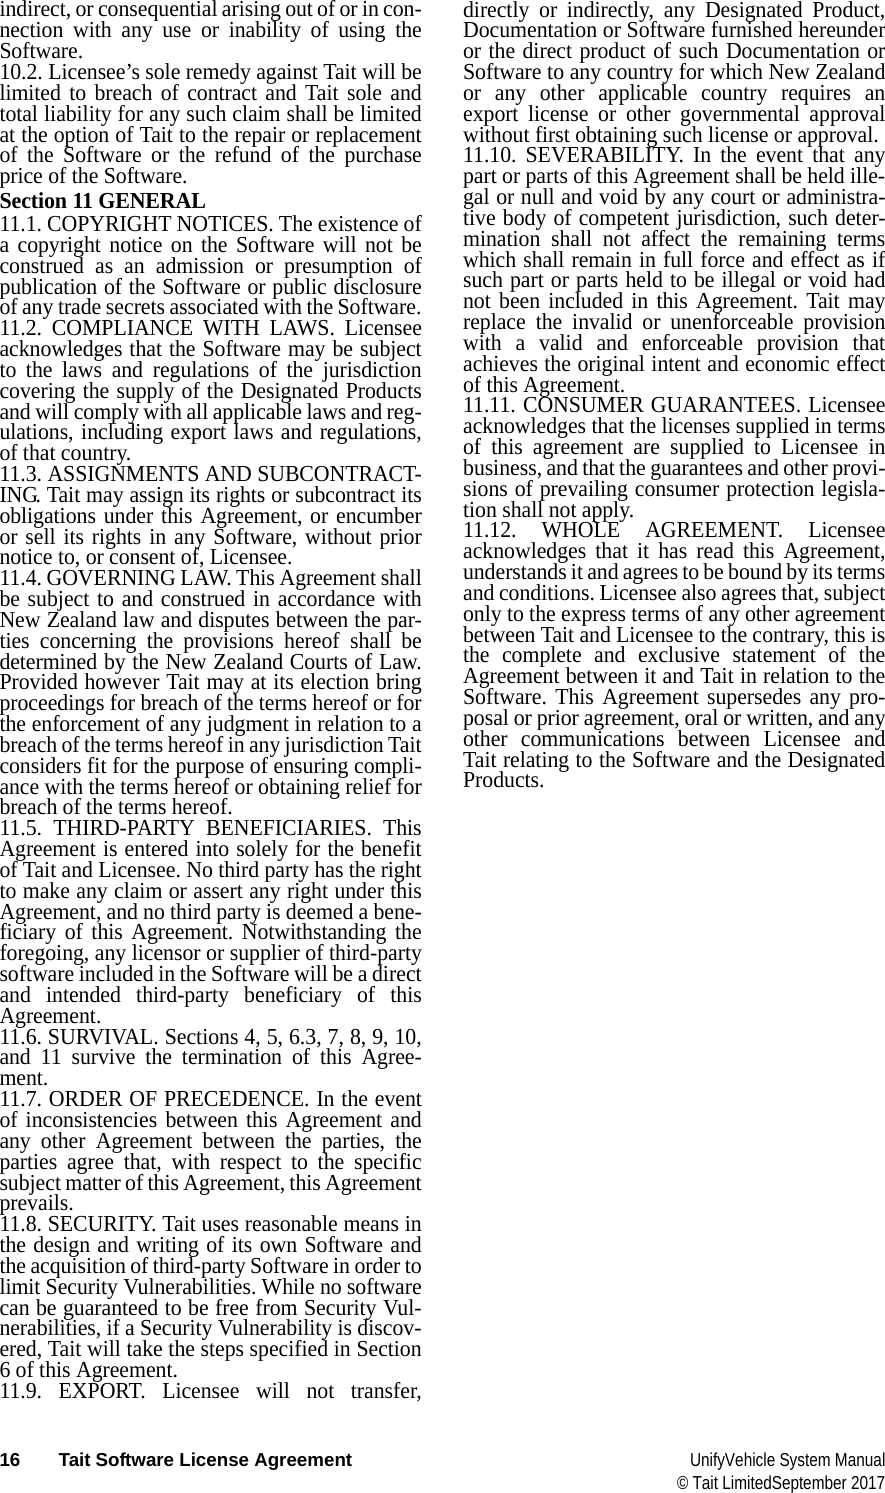  16 Tait Software License Agreement UnifyVehicle System Manual© Tait LimitedSeptember 2017indirect, or consequential arising out of or in con-nection with any use or inability of using the Software.10.2. Licensee’s sole remedy against Tait will be limited to breach of contract and Tait sole and total liability for any such claim shall be limited at the option of Tait to the repair or replacement of the Software or the refund of the purchase price of the Software.Section 11 GENERAL 11.1. COPYRIGHT NOTICES. The existence of a copyright notice on the Software will not be construed as an admission or presumption of publication of the Software or public disclosure of any trade secrets associated with the Software.11.2. COMPLIANCE WITH LAWS. Licensee acknowledges that the Software may be subject to the laws and regulations of the jurisdiction covering the supply of the Designated Products and will comply with all applicable laws and reg-ulations, including export laws and regulations, of that country. 11.3. ASSIGNMENTS AND SUBCONTRACT-ING. Tait may assign its rights or subcontract its obligations under this Agreement, or encumber or sell its rights in any Software, without prior notice to, or consent of, Licensee. 11.4. GOVERNING LAW. This Agreement shall be subject to and construed in accordance with New Zealand law and disputes between the par-ties concerning the provisions hereof shall be determined by the New Zealand Courts of Law. Provided however Tait may at its election bring proceedings for breach of the terms hereof or for the enforcement of any judgment in relation to a breach of the terms hereof in any jurisdiction Tait considers fit for the purpose of ensuring compli-ance with the terms hereof or obtaining relief for breach of the terms hereof.11.5. THIRD-PARTY BENEFICIARIES. This Agreement is entered into solely for the benefit of Tait and Licensee. No third party has the right to make any claim or assert any right under this Agreement, and no third party is deemed a bene-ficiary of this Agreement. Notwithstanding the foregoing, any licensor or supplier of third-party software included in the Software will be a direct and intended third-party beneficiary of this Agreement.11.6. SURVIVAL. Sections 4, 5, 6.3, 7, 8, 9, 10, and 11 survive the termination of this Agree-ment.11.7. ORDER OF PRECEDENCE. In the event of inconsistencies between this Agreement and any other Agreement between the parties, the parties agree that, with respect to the specific subject matter of this Agreement, this Agreement prevails.11.8. SECURITY. Tait uses reasonable means in the design and writing of its own Software and the acquisition of third-party Software in order to limit Security Vulnerabilities. While no software can be guaranteed to be free from Security Vul-nerabilities, if a Security Vulnerability is discov-ered, Tait will take the steps specified in Section 6 of this Agreement.11.9. EXPORT. Licensee will not transfer, directly or indirectly, any Designated Product, Documentation or Software furnished hereunder or the direct product of such Documentation or Software to any country for which New Zealand or any other applicable country requires an export license or other governmental approval without first obtaining such license or approval.11.10. SEVERABILITY. In the event that any part or parts of this Agreement shall be held ille-gal or null and void by any court or administra-tive body of competent jurisdiction, such deter-mination shall not affect the remaining terms which shall remain in full force and effect as if such part or parts held to be illegal or void had not been included in this Agreement. Tait may replace the invalid or unenforceable provision with a valid and enforceable provision that achieves the original intent and economic effect of this Agreement.11.11. CONSUMER GUARANTEES. Licensee acknowledges that the licenses supplied in terms of this agreement are supplied to Licensee in business, and that the guarantees and other provi-sions of prevailing consumer protection legisla-tion shall not apply. 11.12. WHOLE AGREEMENT. Licensee acknowledges that it has read this Agreement, understands it and agrees to be bound by its terms and conditions. Licensee also agrees that, subject only to the express terms of any other agreement between Tait and Licensee to the contrary, this is the complete and exclusive statement of the Agreement between it and Tait in relation to the Software. This Agreement supersedes any pro-posal or prior agreement, oral or written, and any other communications between Licensee and Tait relating to the Software and the Designated Products.